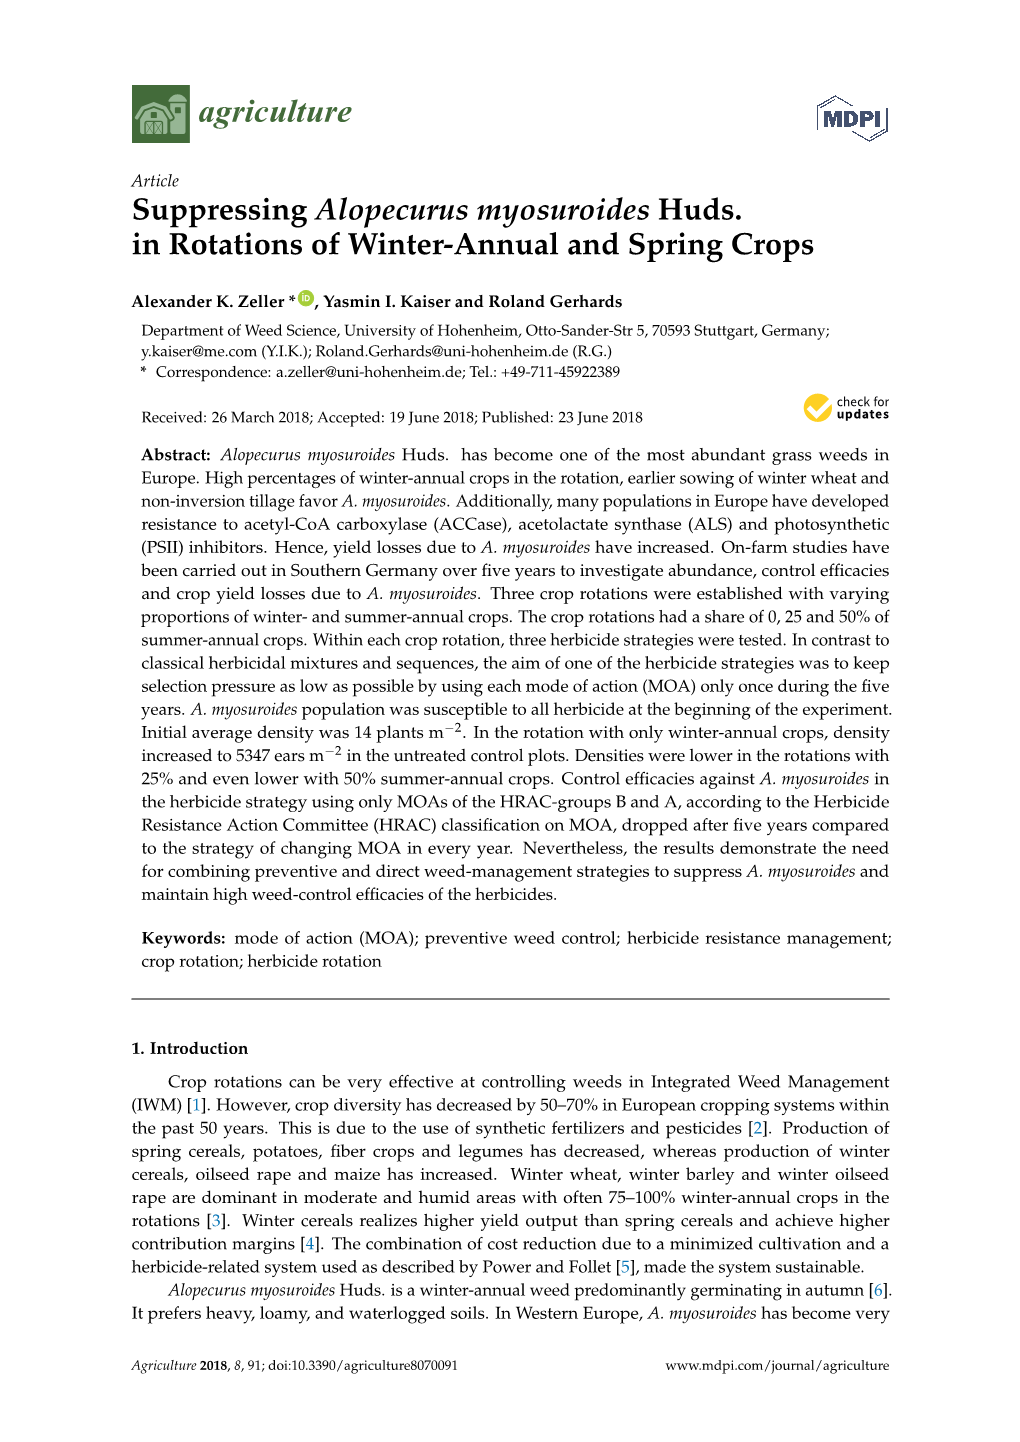 Suppressing Alopecurus Myosuroides Huds. in Rotations of Winter-Annual and Spring Crops